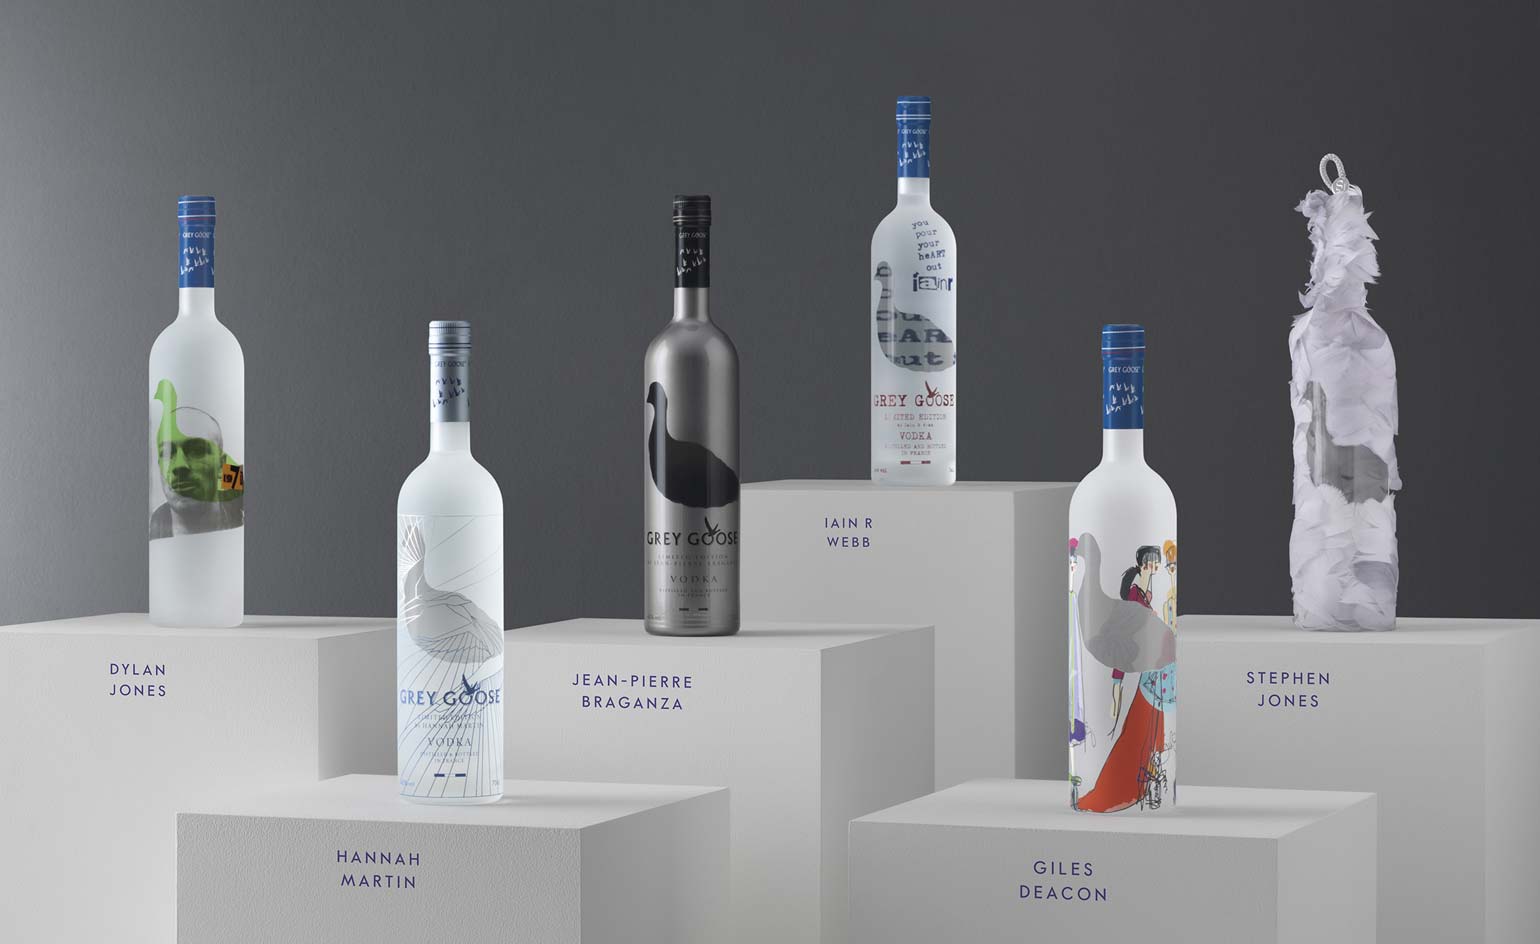 GREY GOOSE® VODKA PRESENTS GREY GOOSE® VX, A PIONEERING NEW SPIRIT INSPIRED  BY THE HERITAGE OF ITS CREATOR AND MAÎTRE DE CHAI FRANÇOIS THIBAULT